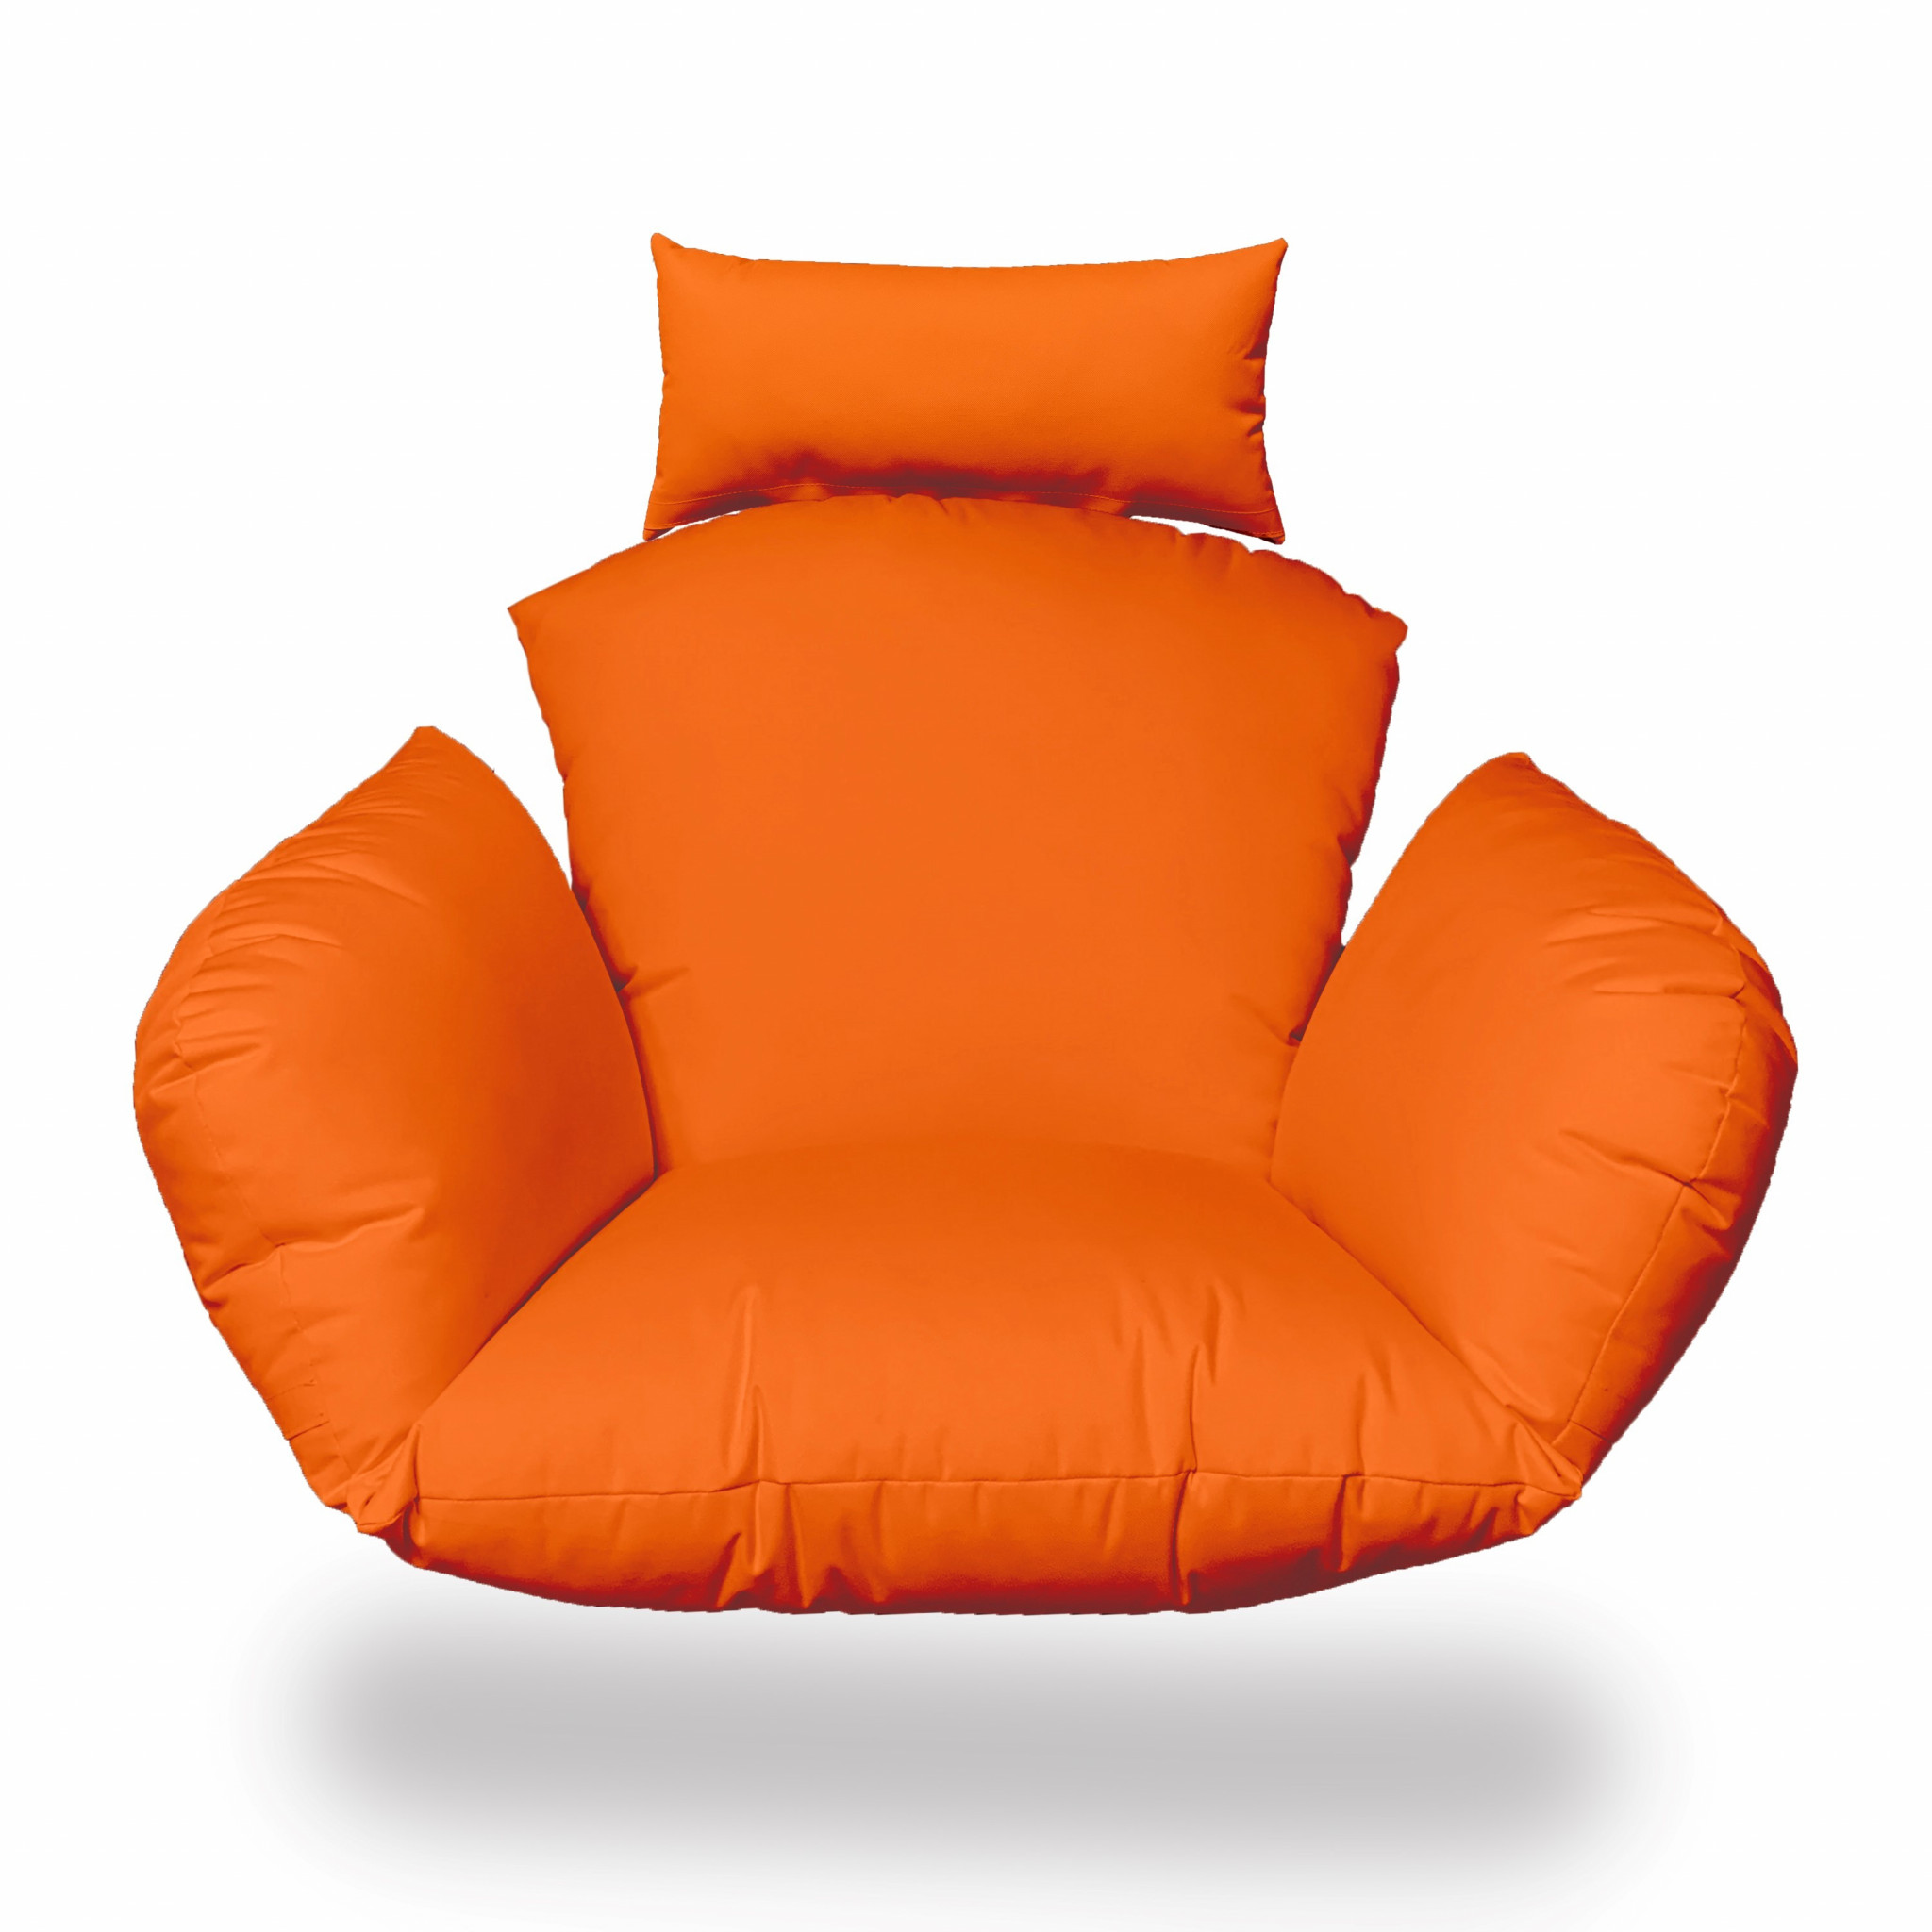 Primo Orange Indoor Outdoor Replacement Cushion for Egg Chair-472994-1